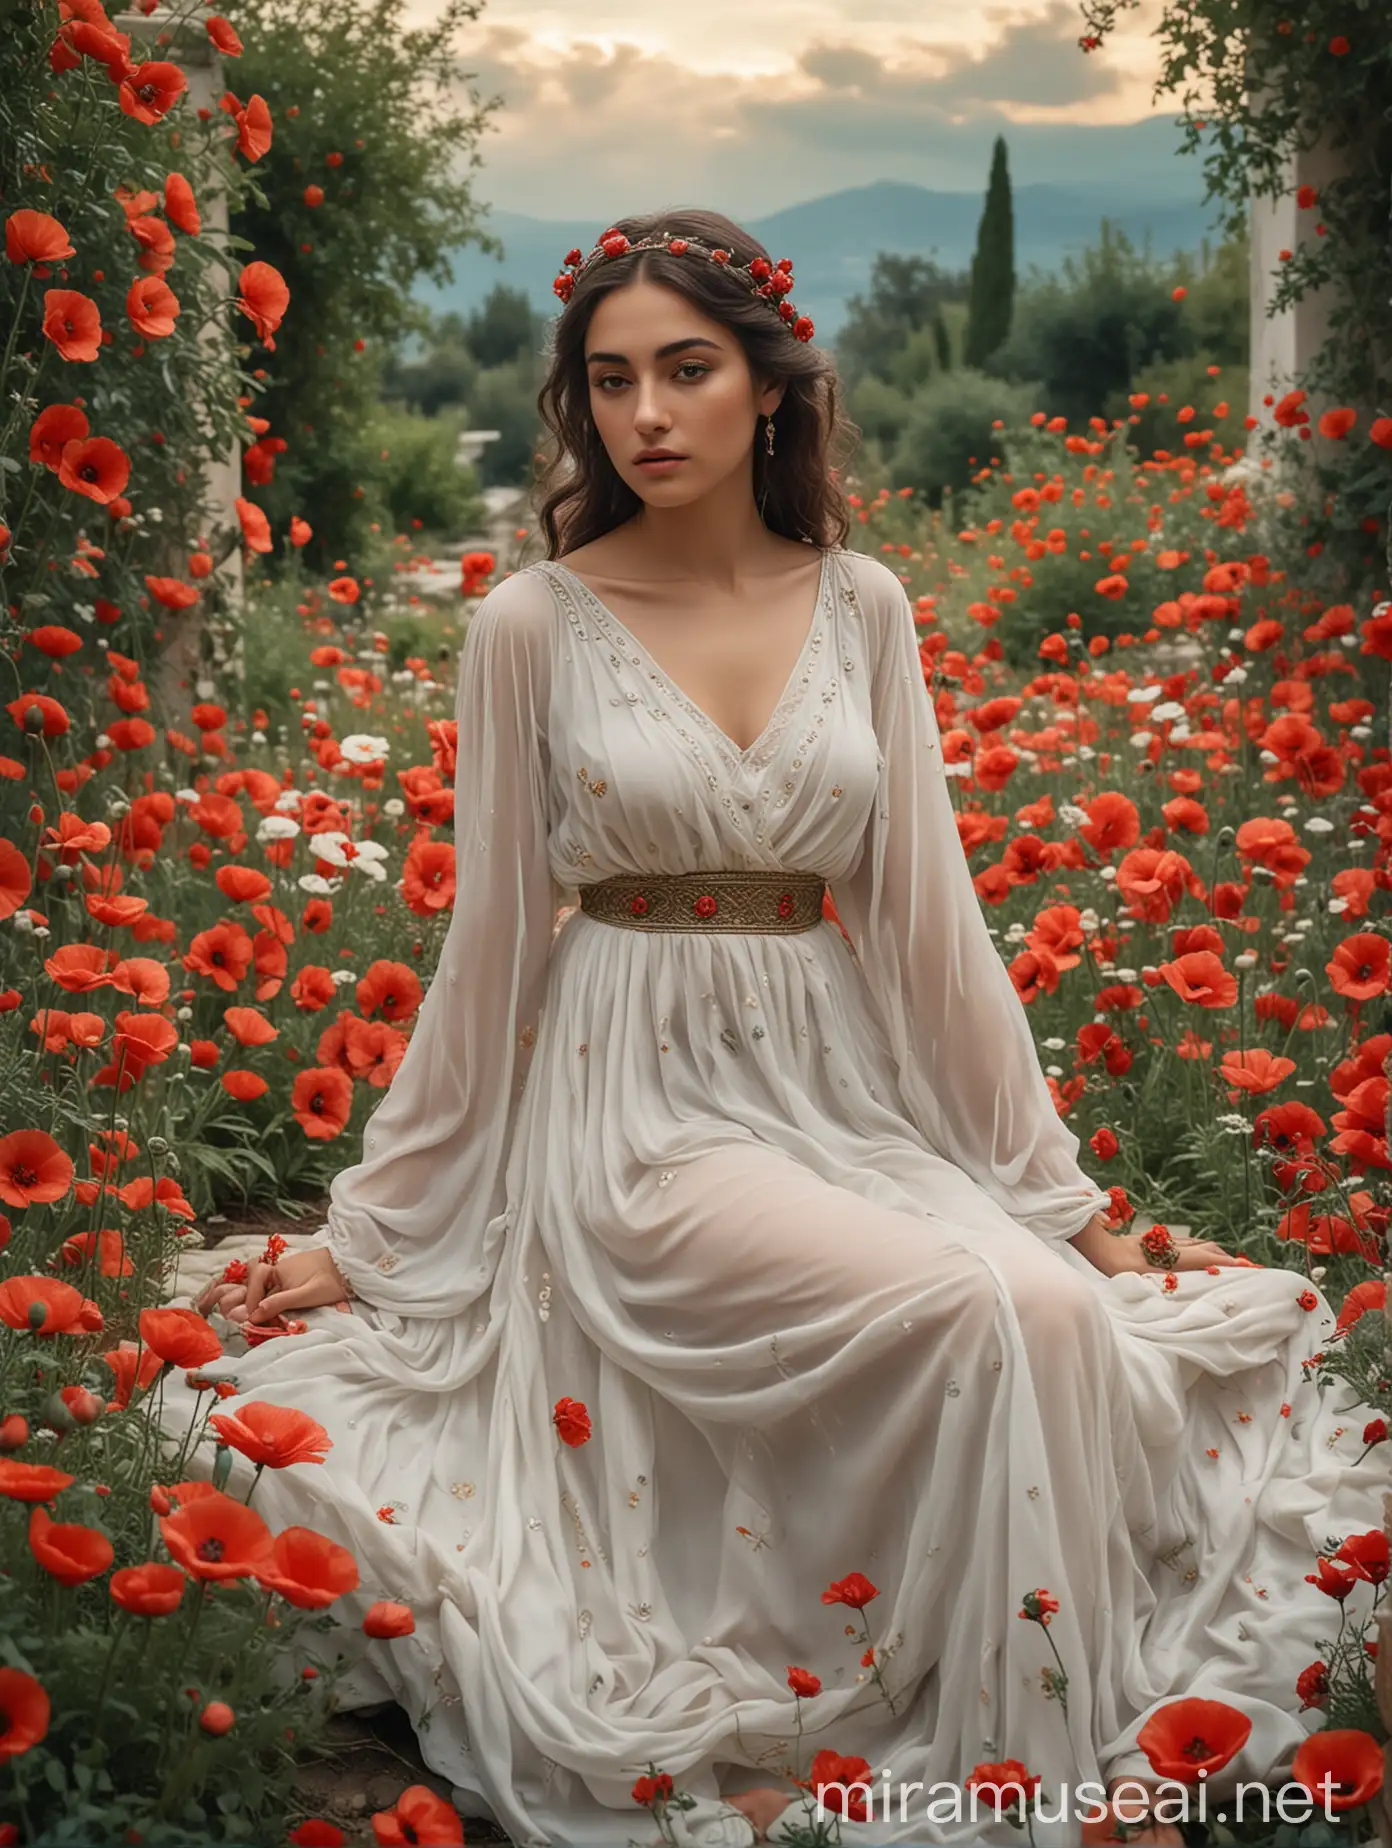 Aslıhan Malbora as Pasithea, the goddess of relaxation and dreams. She is sitting in a garden filled with exotic flowers and calming plants. The environment is intricately drawn with ethereal clouds. The color palette includes soft hues, with a diffuse light creating a magical and tranquil atmosphere. She is crowned by red poppies flowers. She is wearing a white and transluced Greek dress.